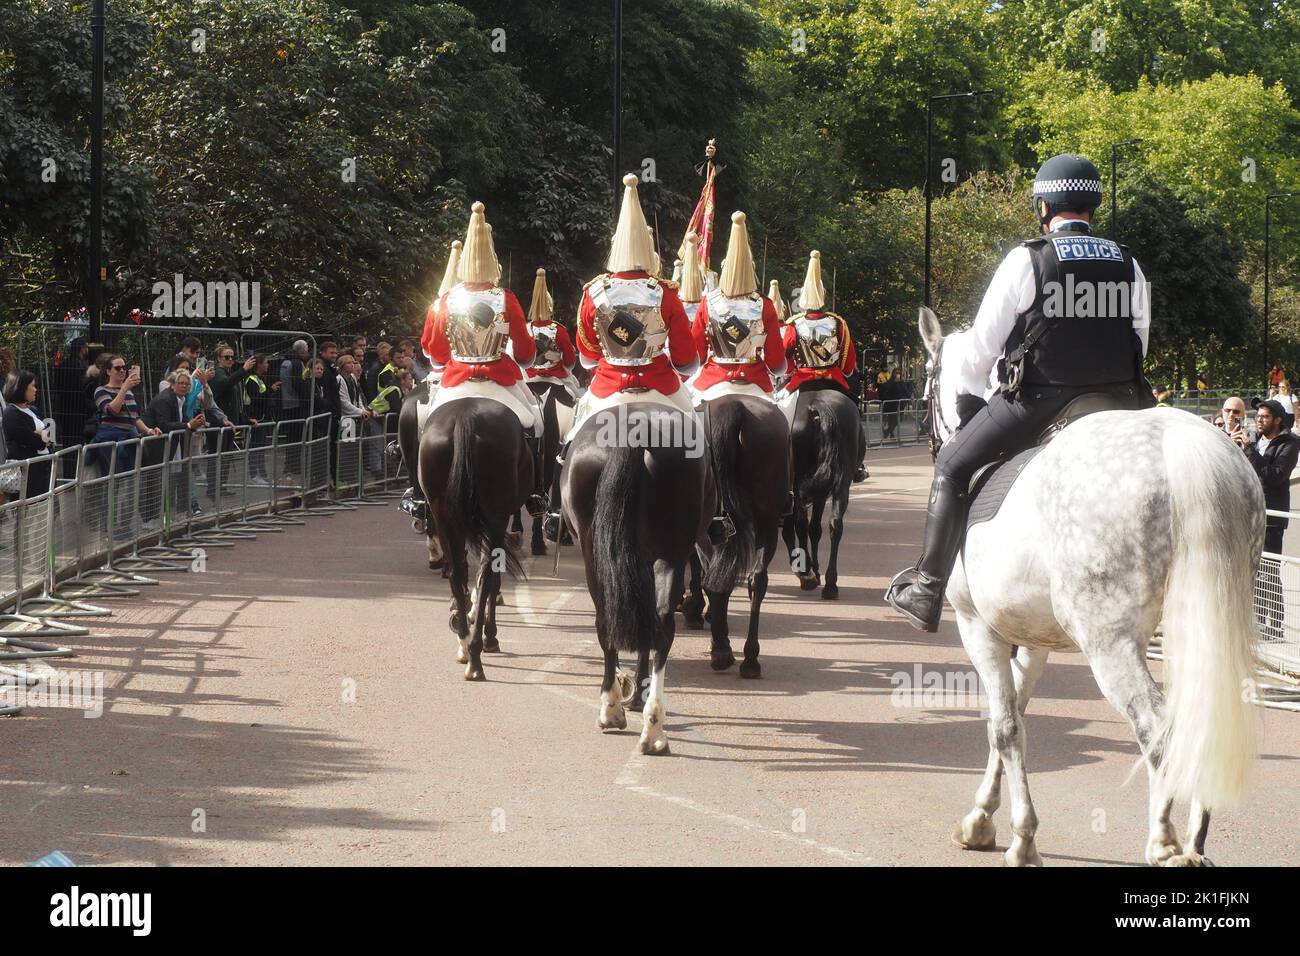 London, UK. 18th Sep, 2022. Stewards, media and police fine tune final preparations for Wellington Arch funeral stage. Credit: Brian Minkoff /Alamy Live News Stock Photo